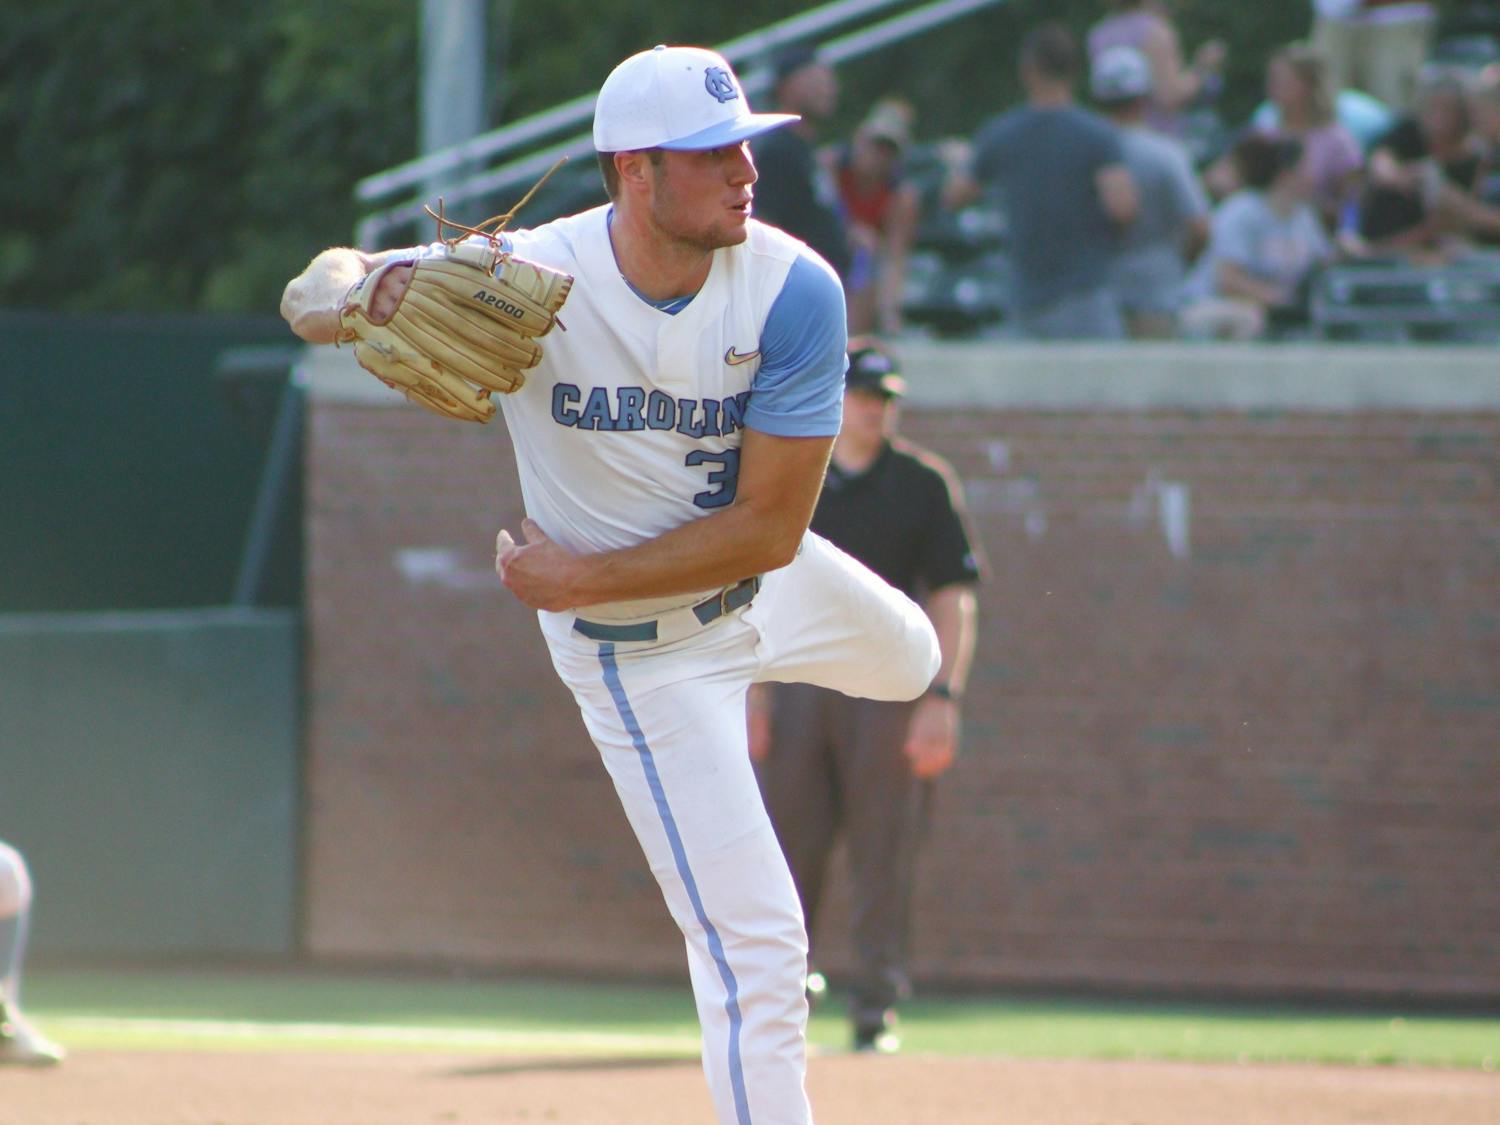 Junior pitcher Brandon Schaeffer (39) throws a pitch in a game versus Florida State. UNC won 10-4 against FSU at home in the second game of the three-game series on Friday, May 20, 2022.